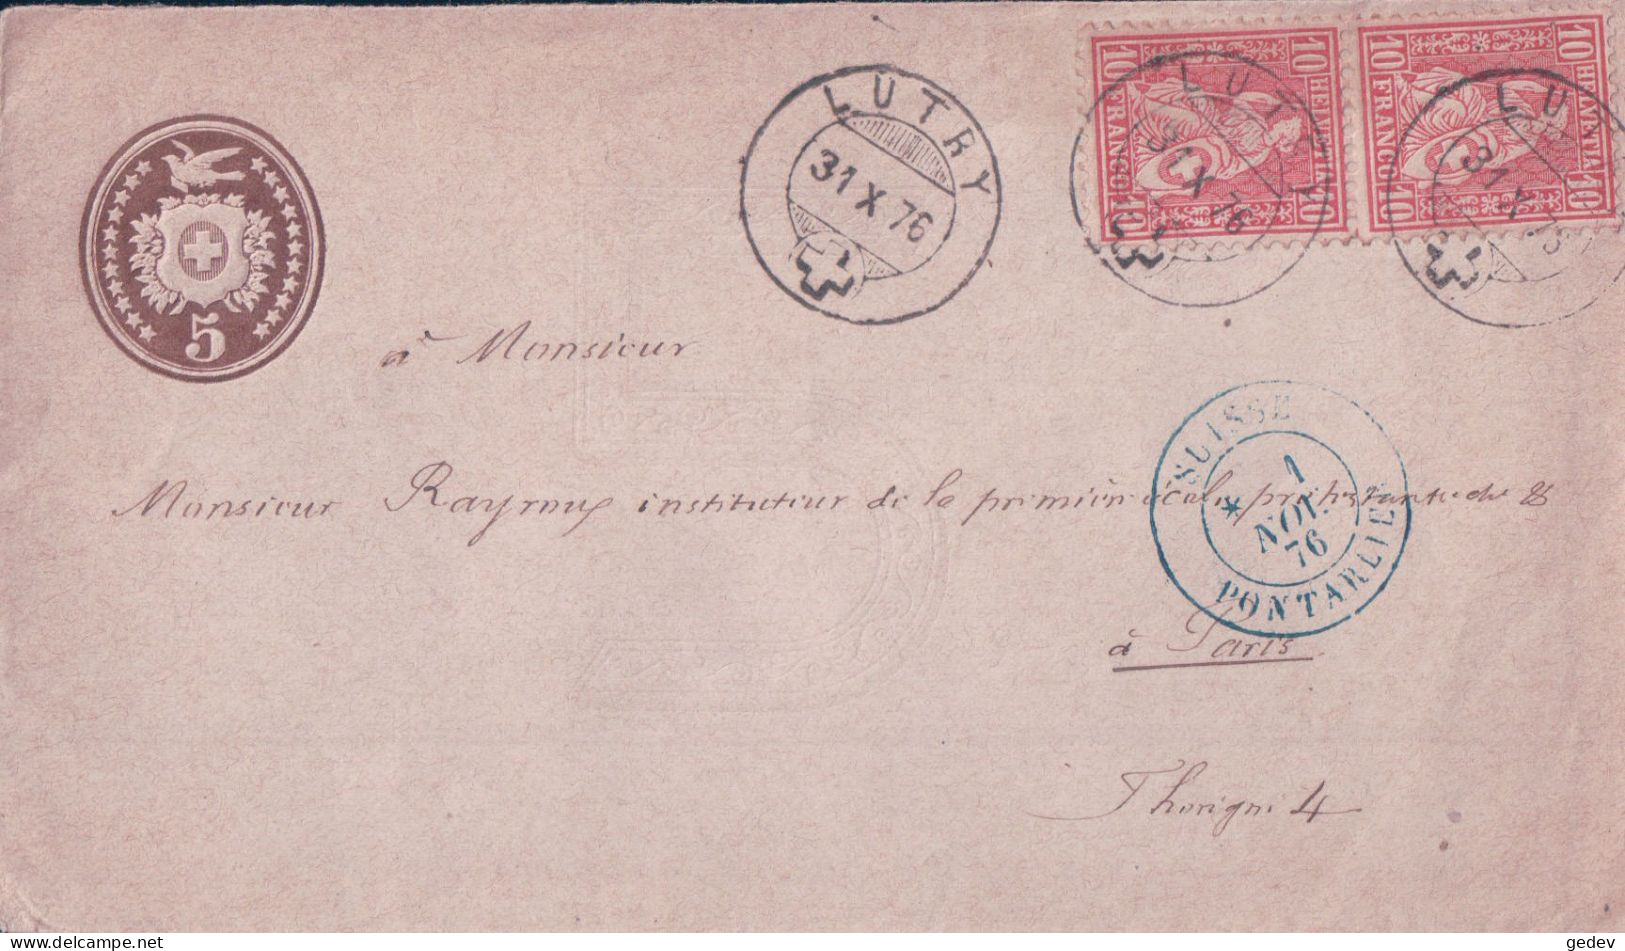 Suisse, Lettre Entier Postal 5 Ct + Timbres, Lutry - Pontarlier - Paris 31.X.1876 - Stamped Stationery